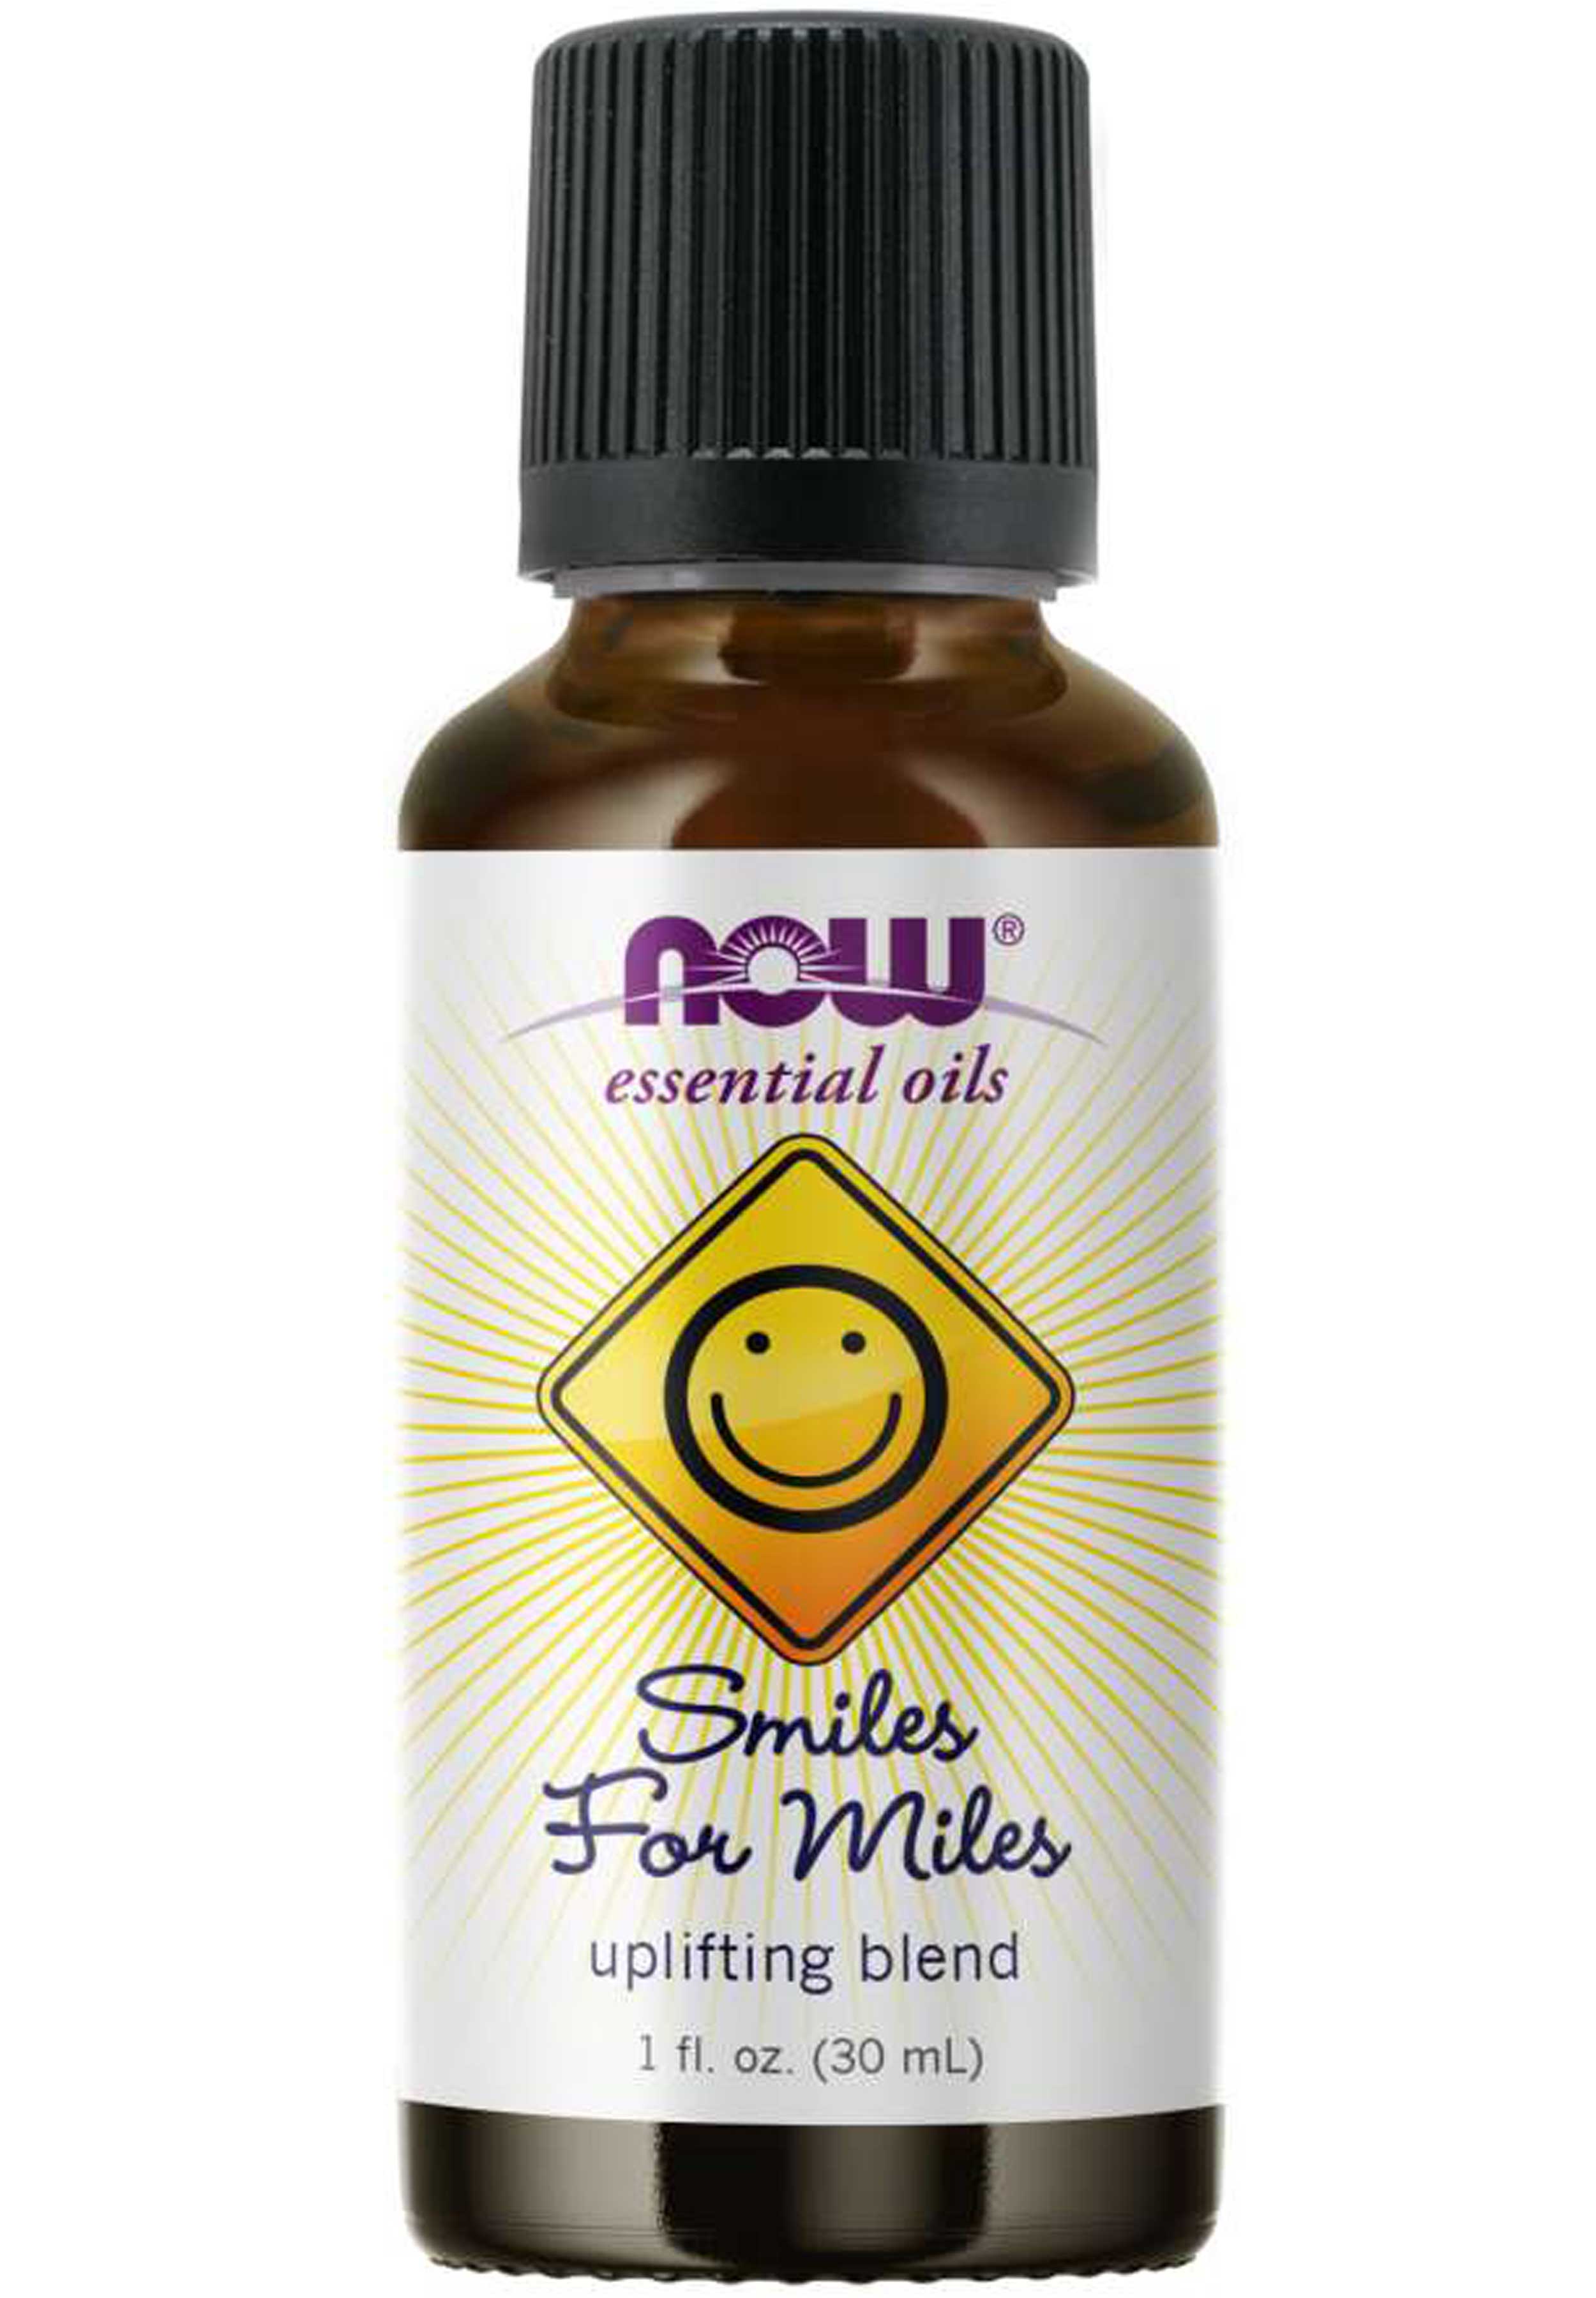 NOW Essential Oils Smiles for Miles Oil Blend